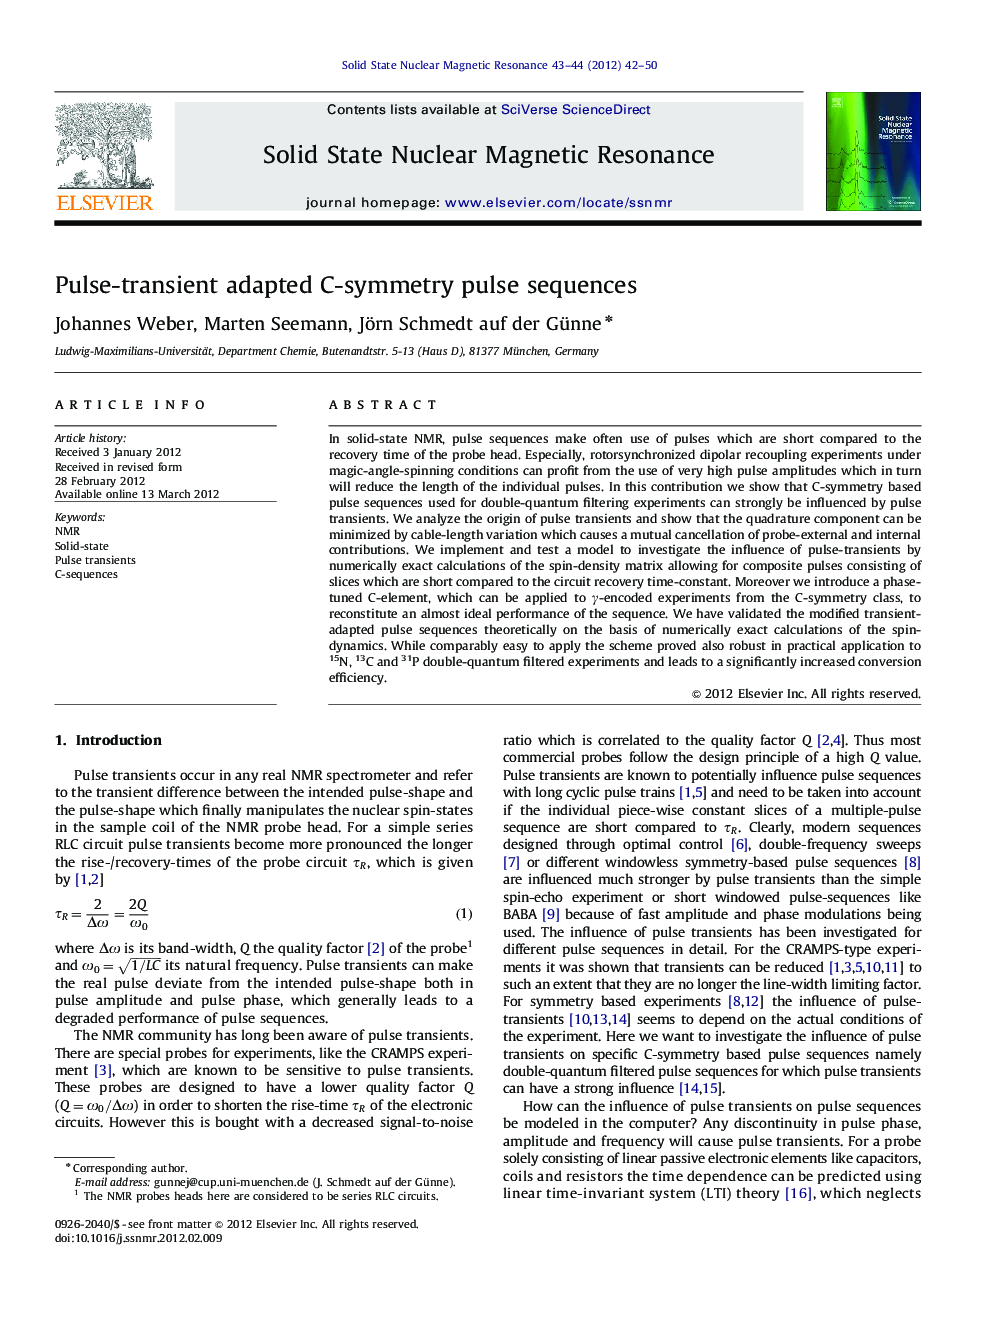 Pulse-transient adapted C-symmetry pulse sequences